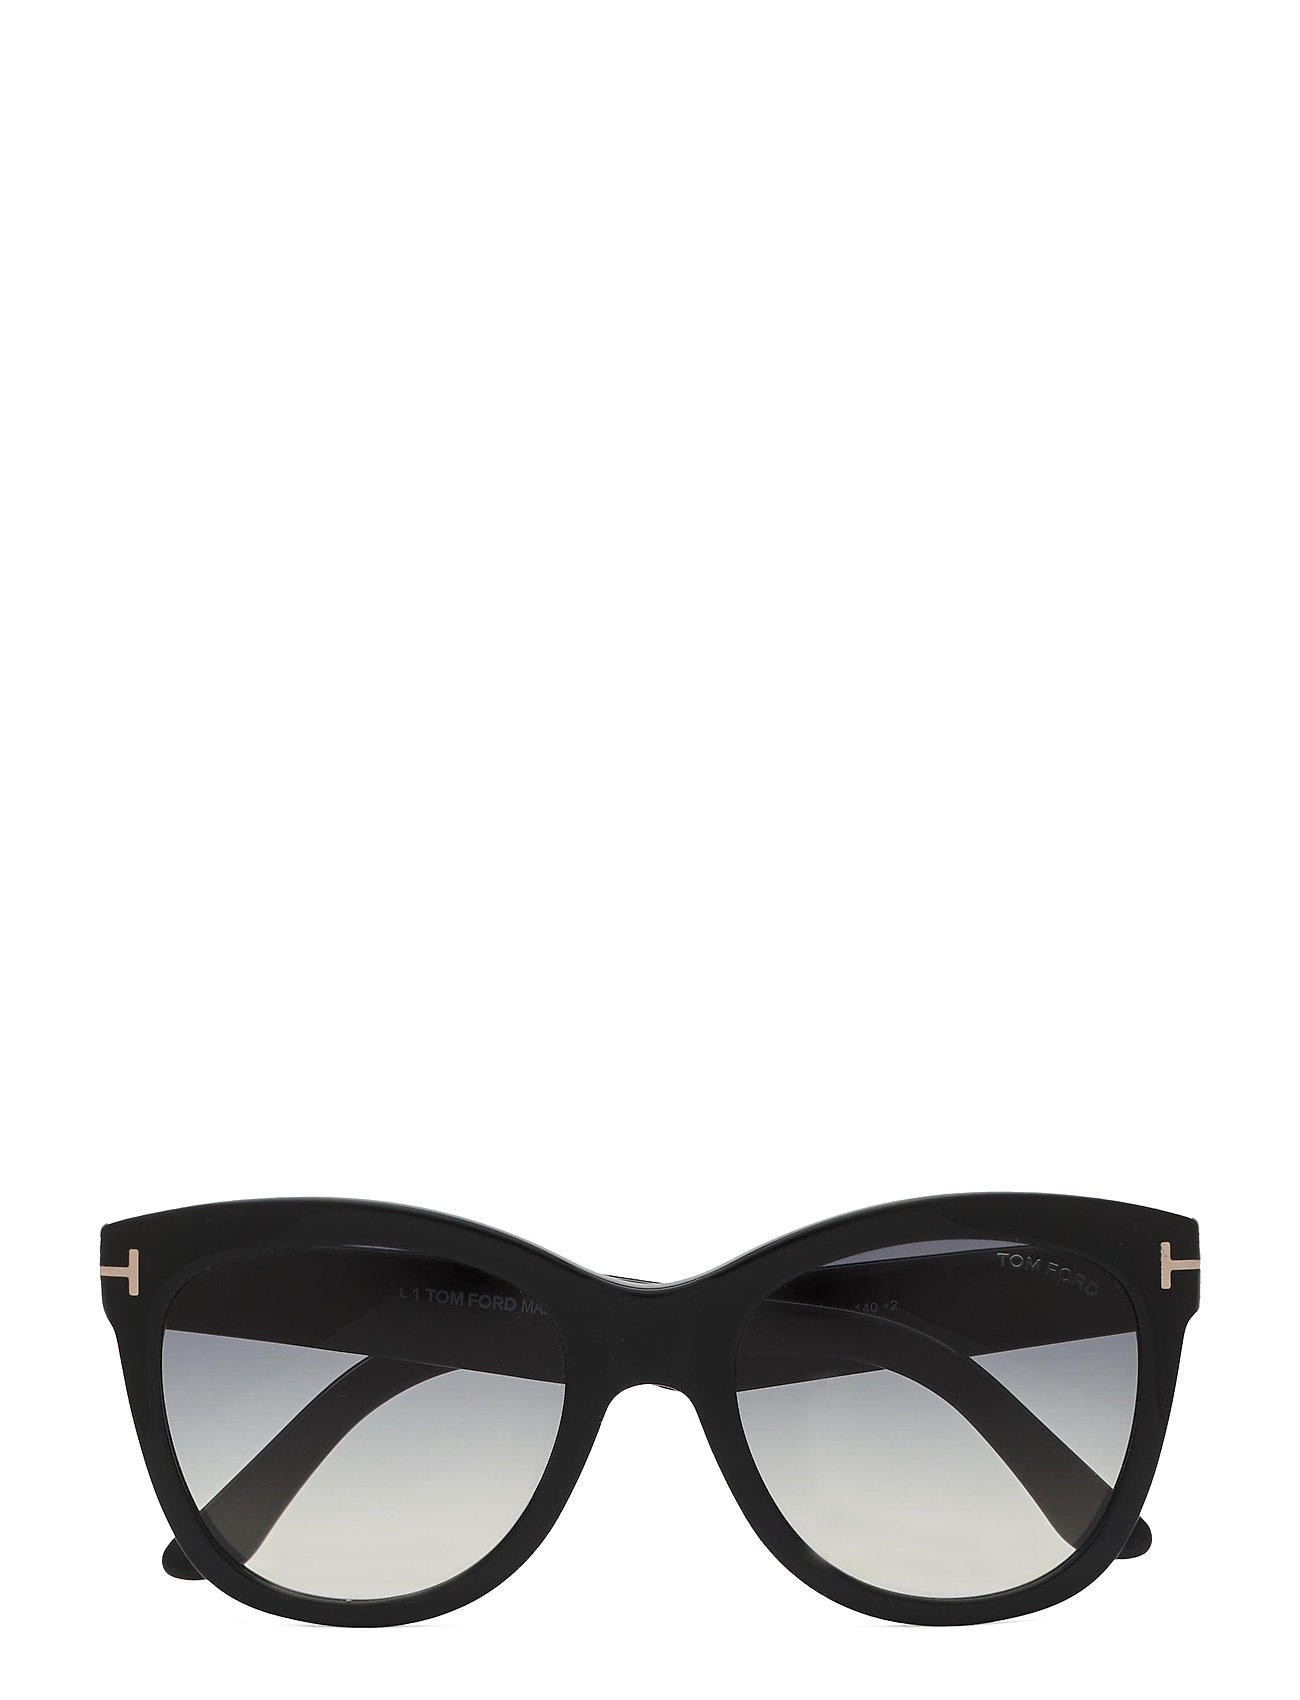 Tom Ford FT 0870 Wallace 45P Sunglasses